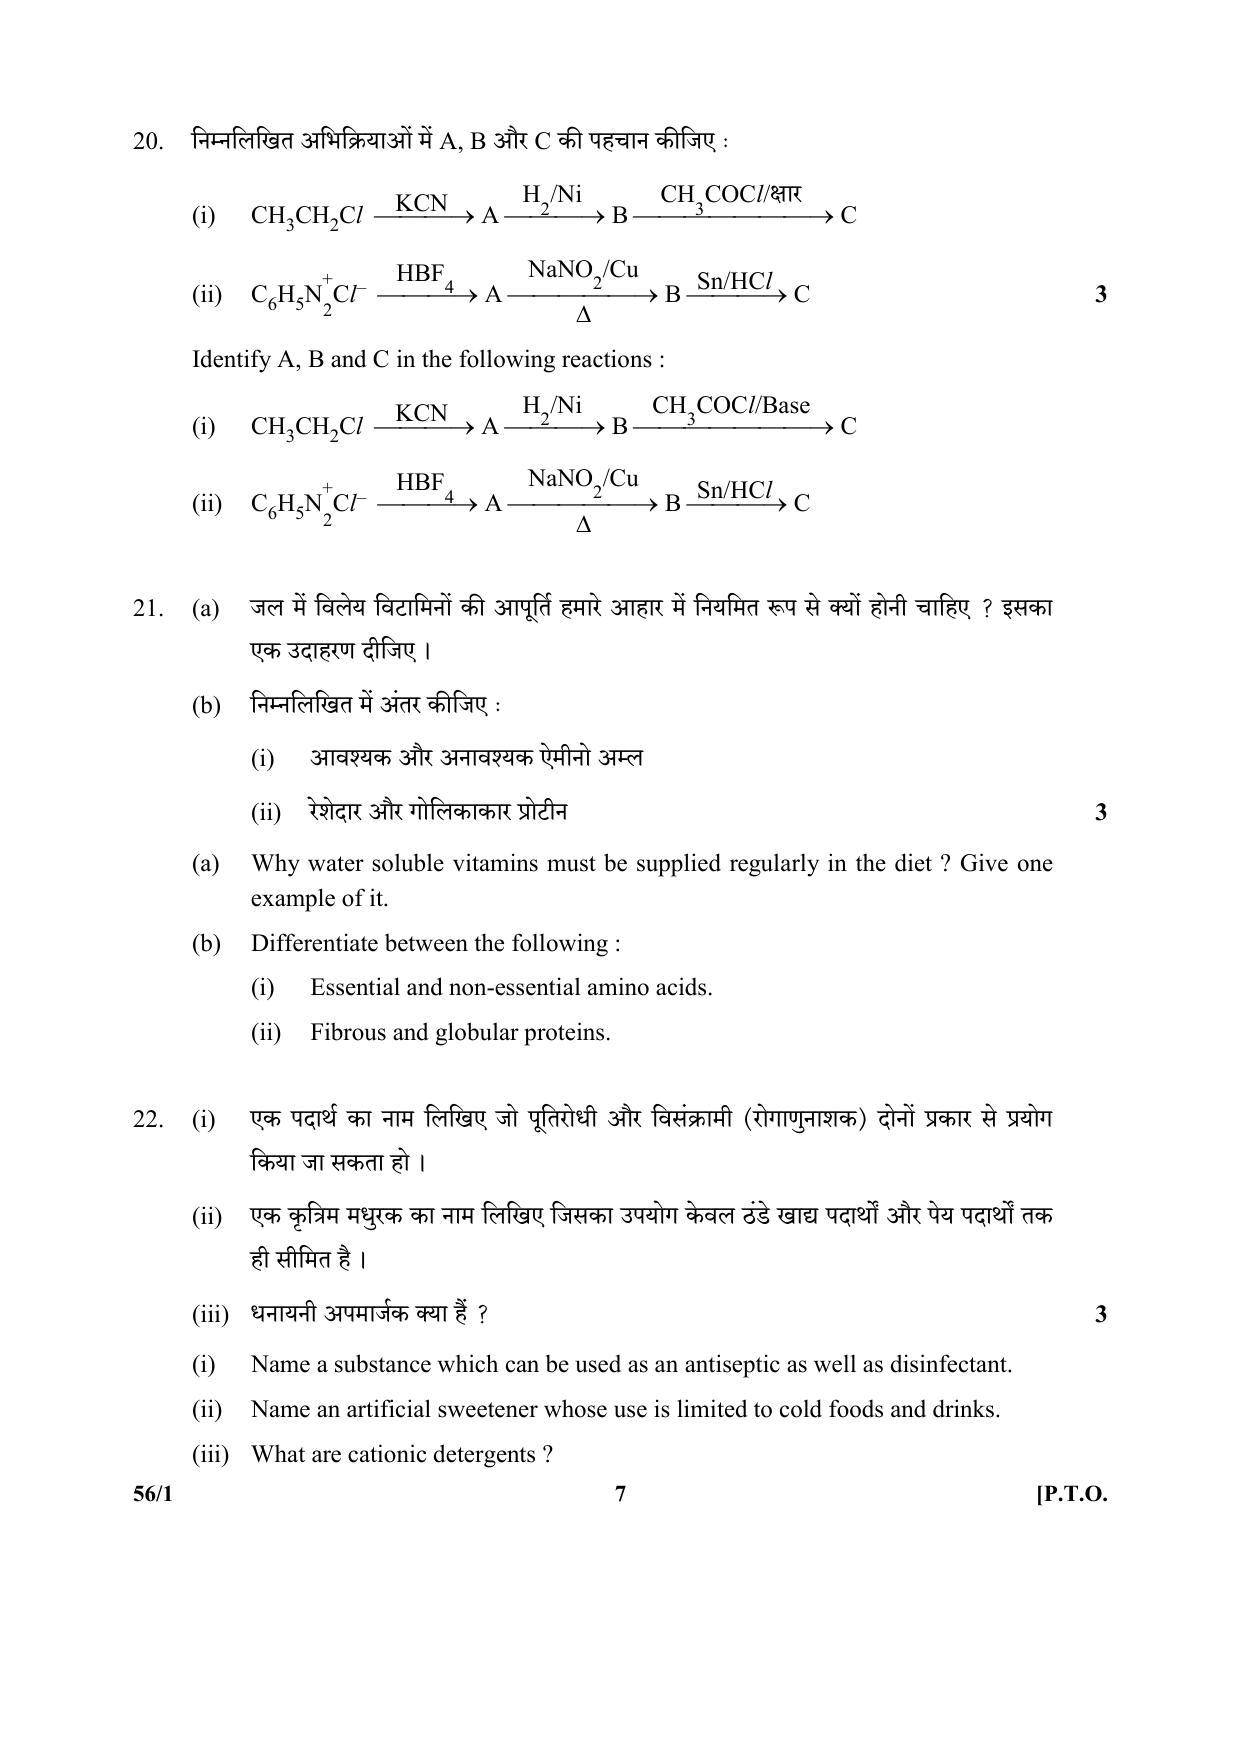 CBSE Class 12 56-1- (Chemistry) 2017-comptt Question Paper - Page 7